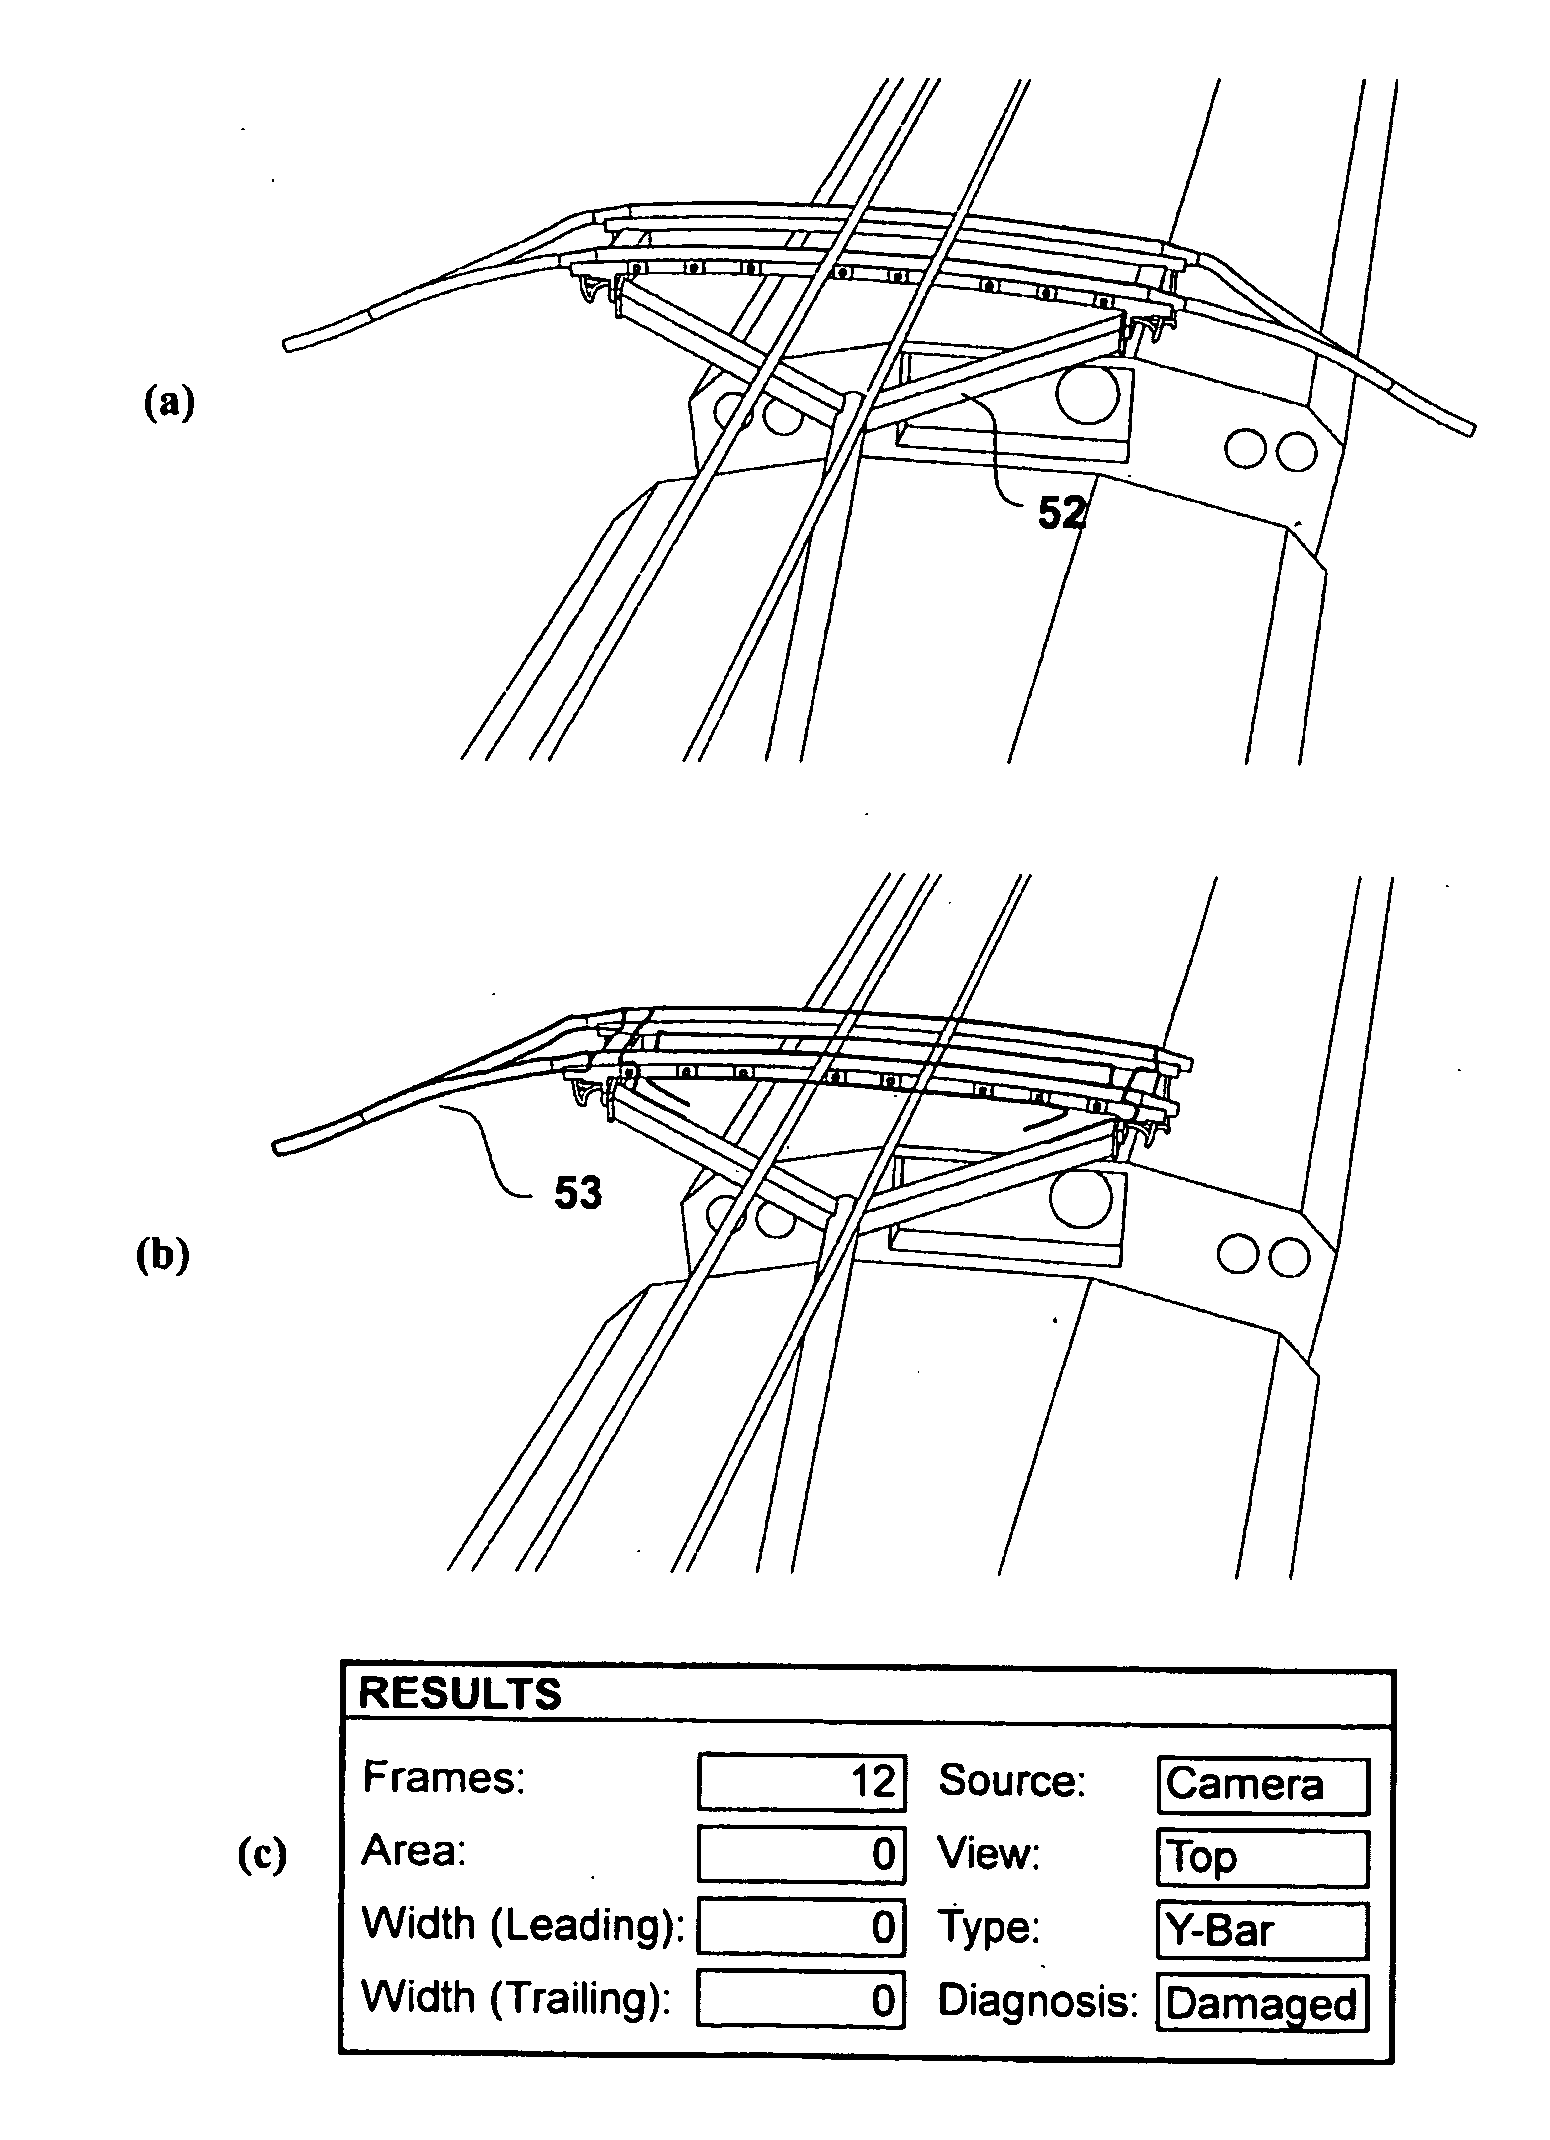 Pantograph damage and wear monitoring system